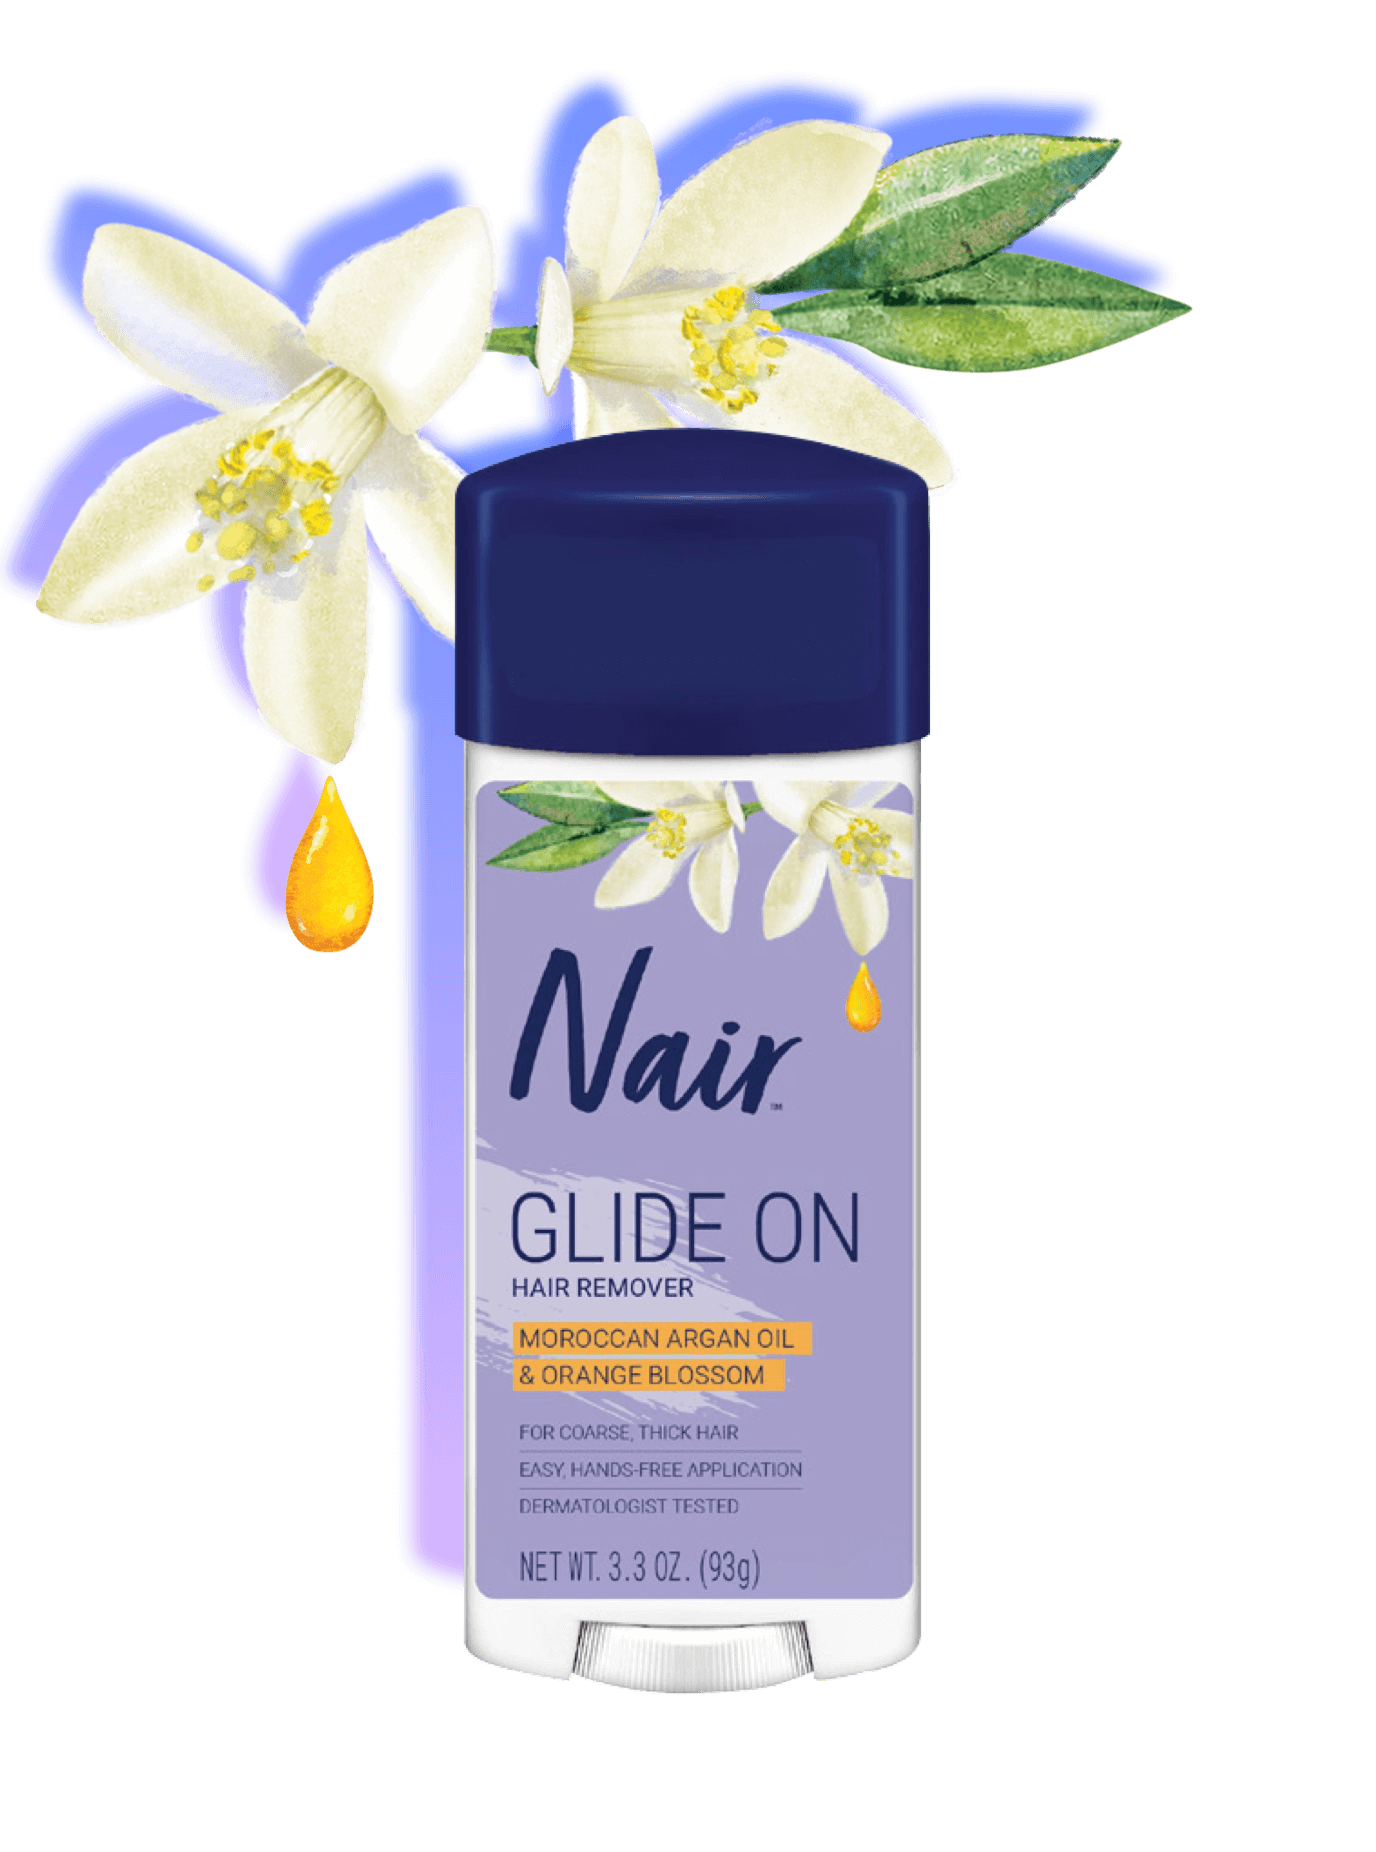 Nair Glide On Hair Remover with argan oil & orange blossom in adjustable package for hands-free use.